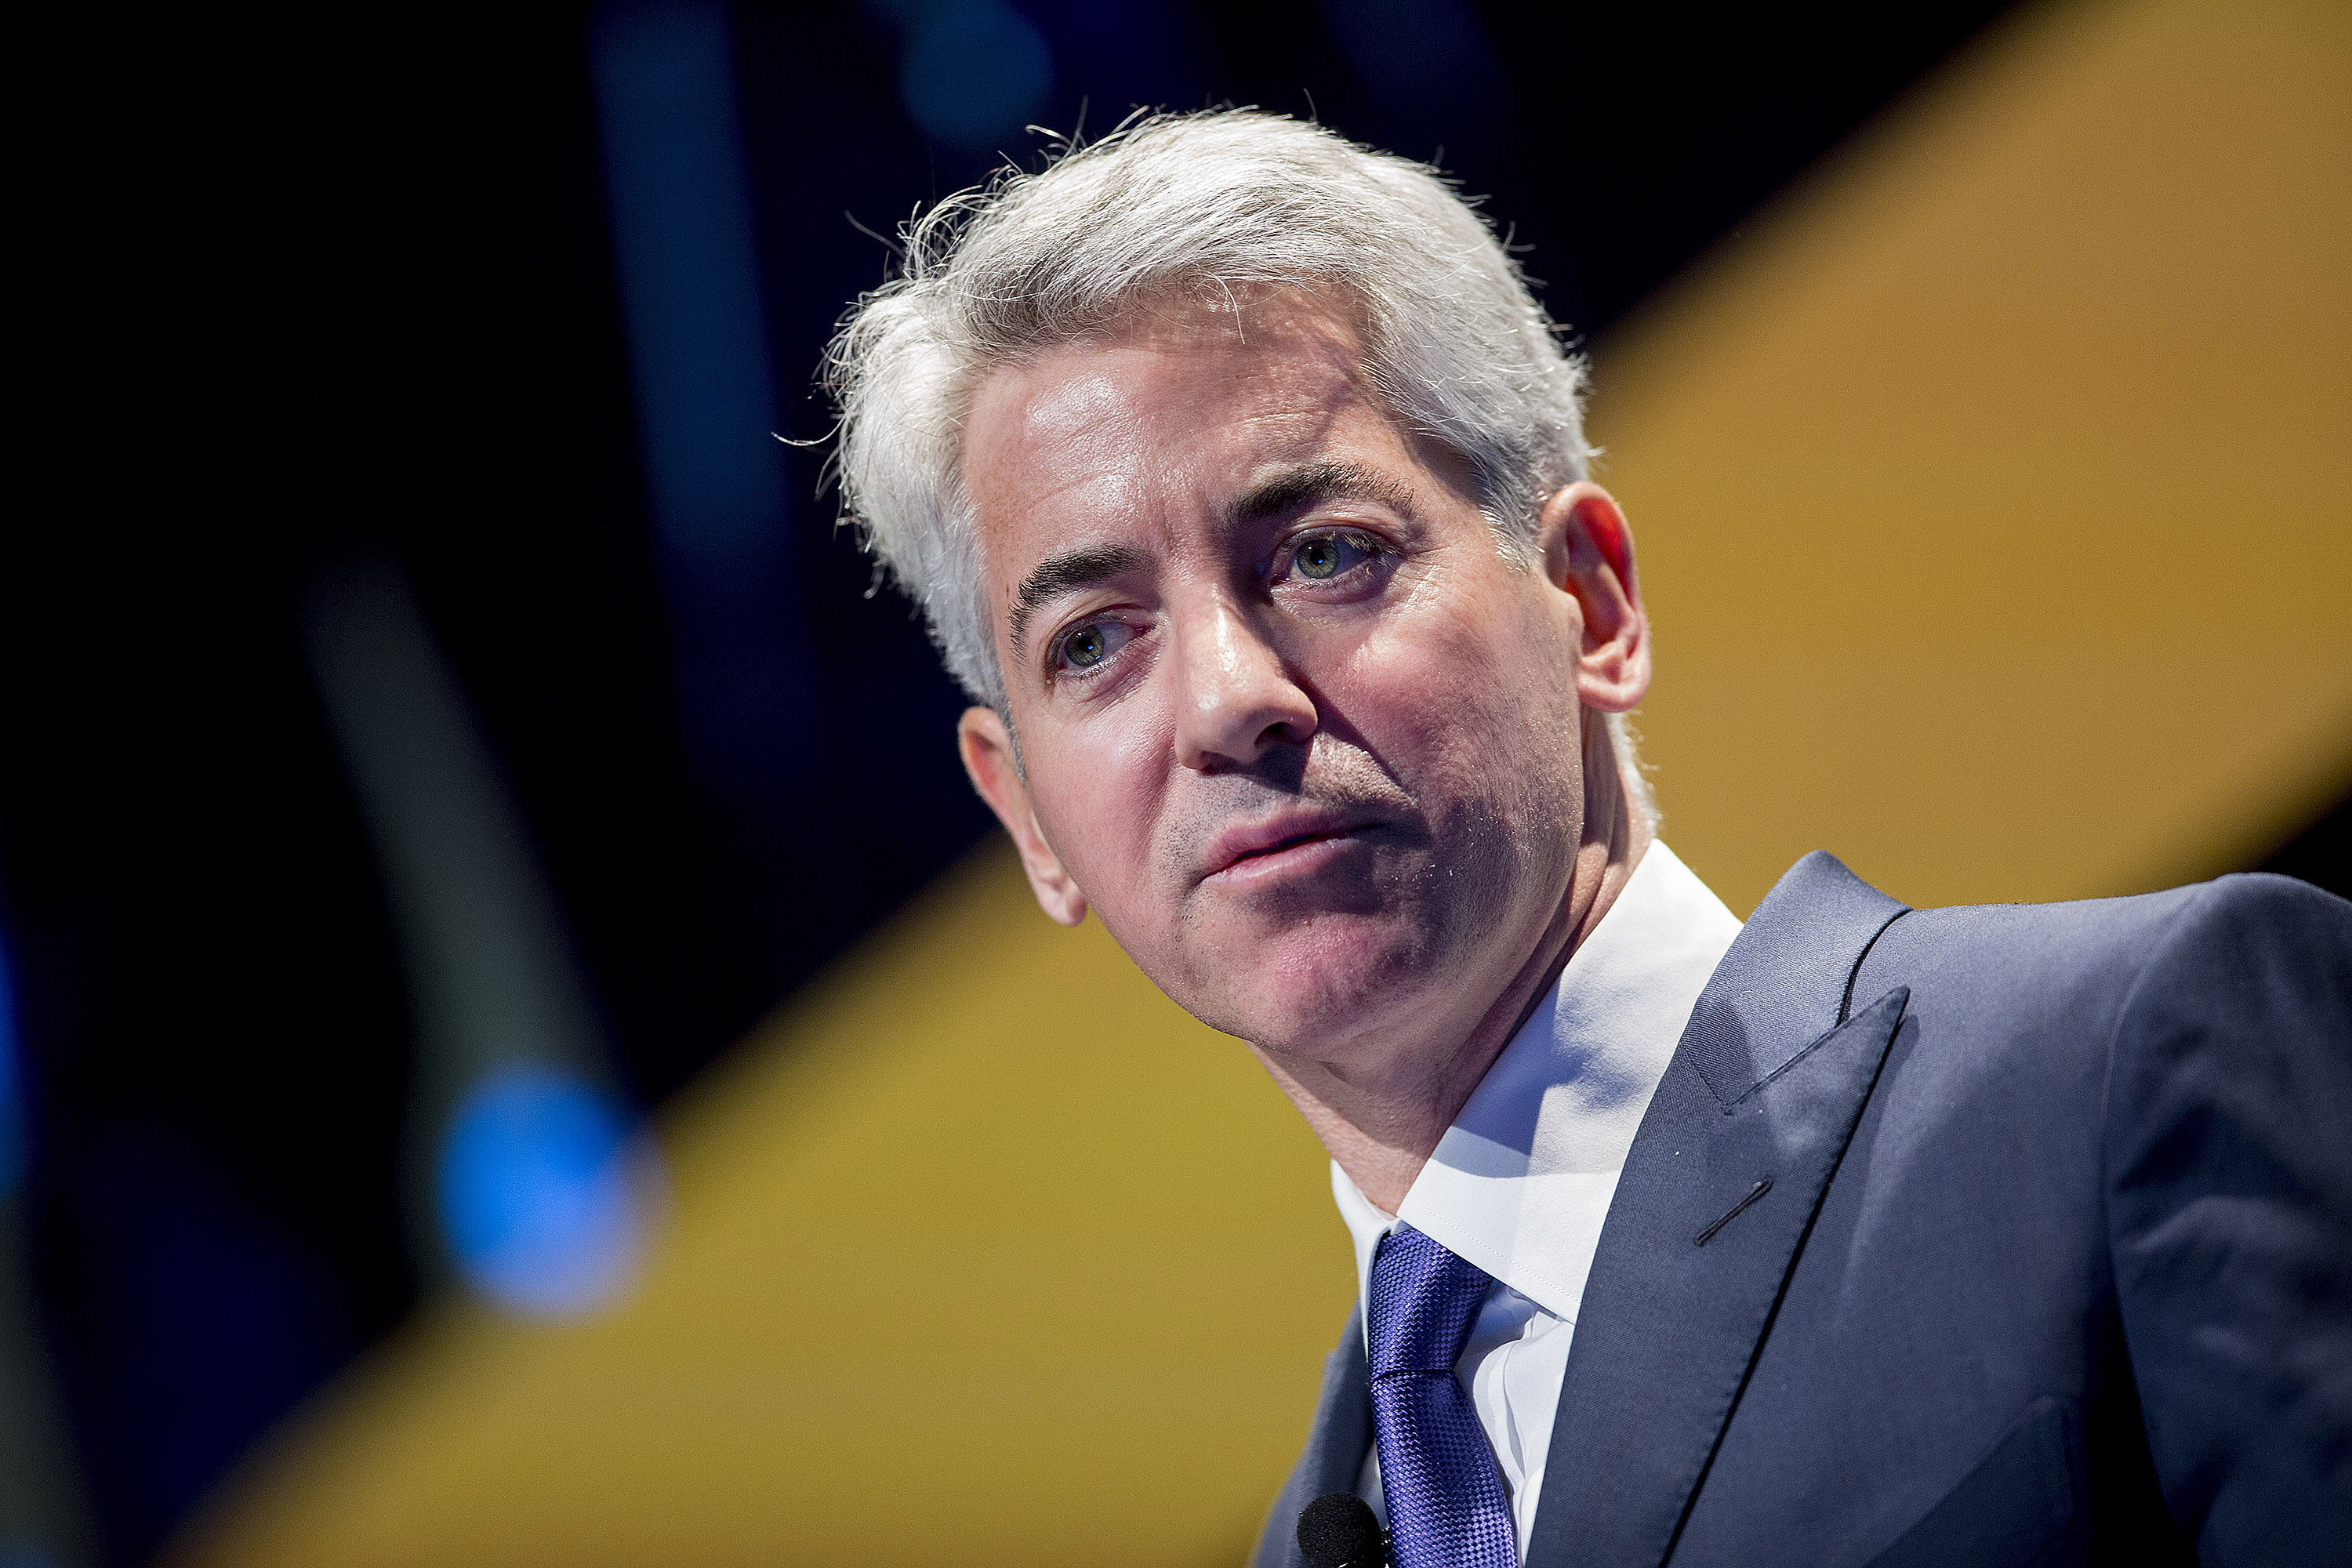 William Ackman, Founder and Chief Executive Officer of Pershing Square Capital Management LP, speaks during the 20th Annual Sohn Investment Conference in New York on May 4. Photographer: Andrew Harrer/Bloomberg
